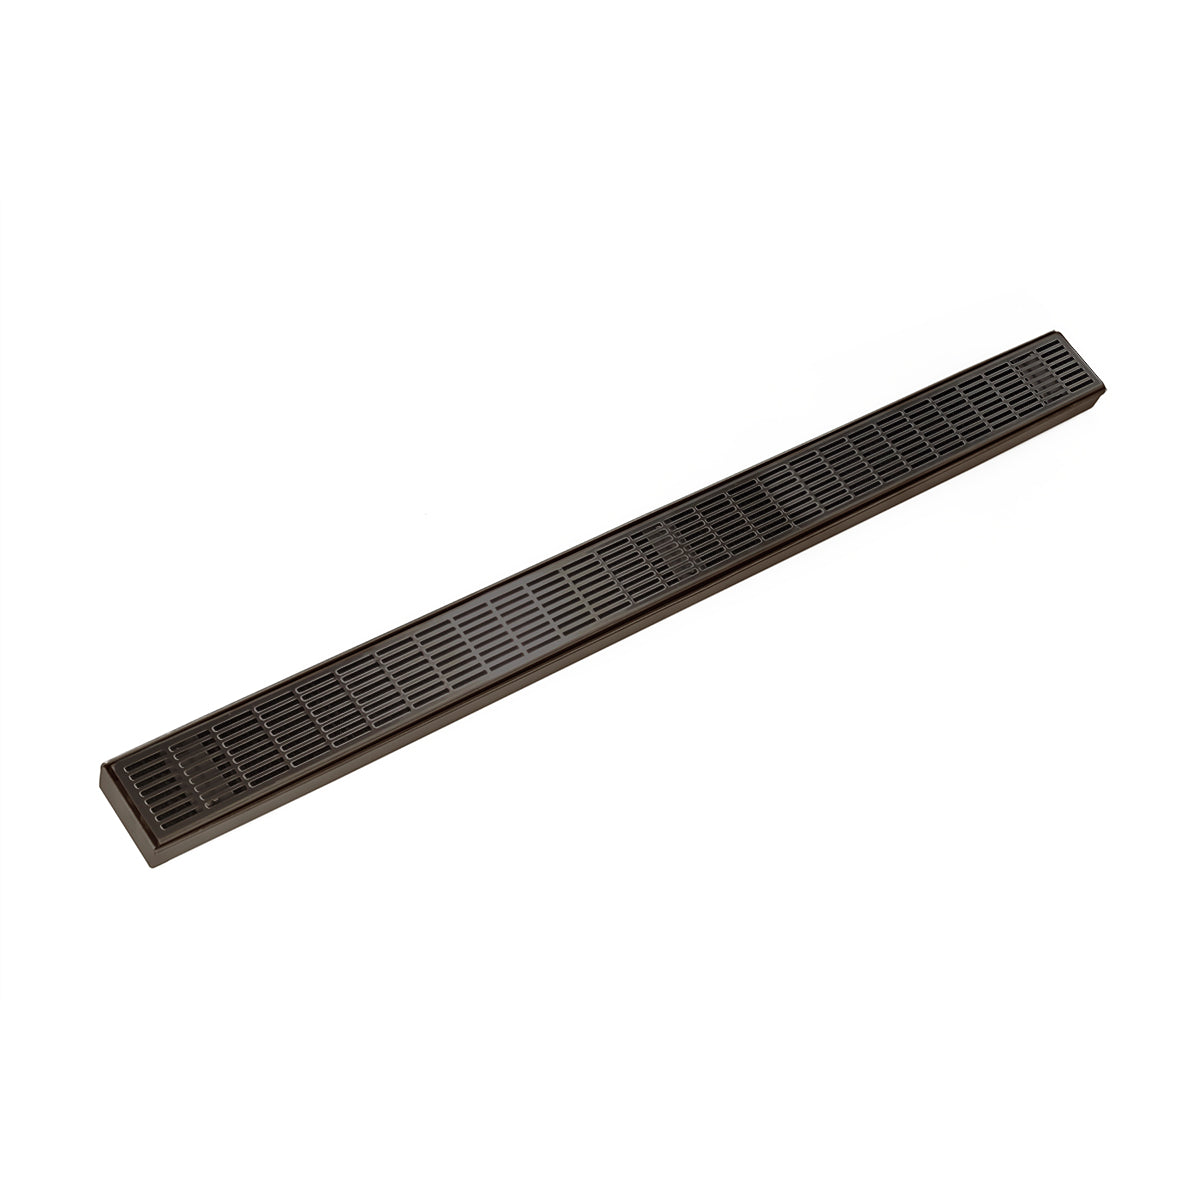 Infinity Drain 32" FX Series Fixed Length Linear Drain Kit with Perforated Slotted Grate